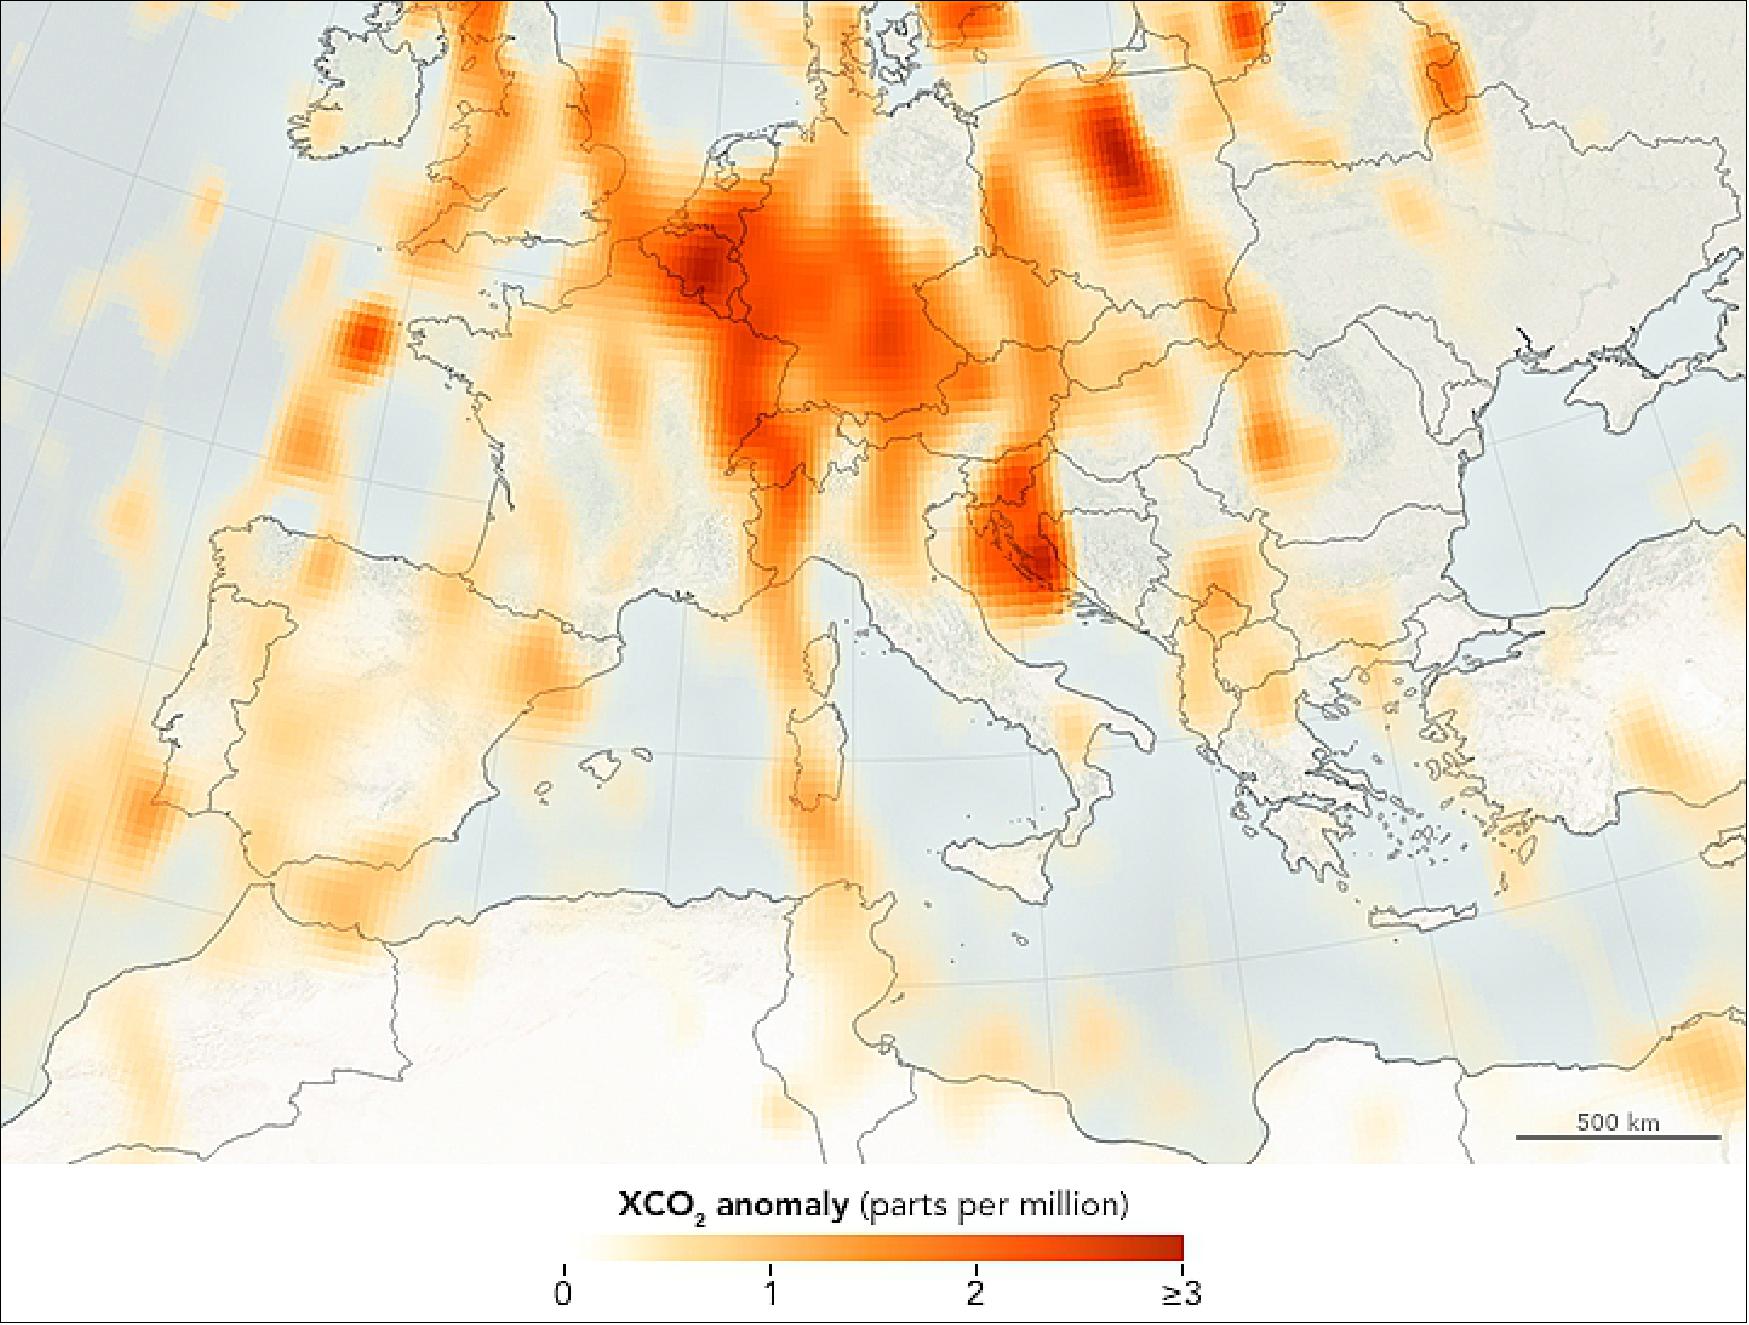 Figure 23: Illustration of OCO-2 CO2 concentrations in Europe measured in the period 2014-2016 (image credit: NASA Earth Observatory, maps by Joshua Stevens, using OCO-2 anomaly data of Ref. 44)